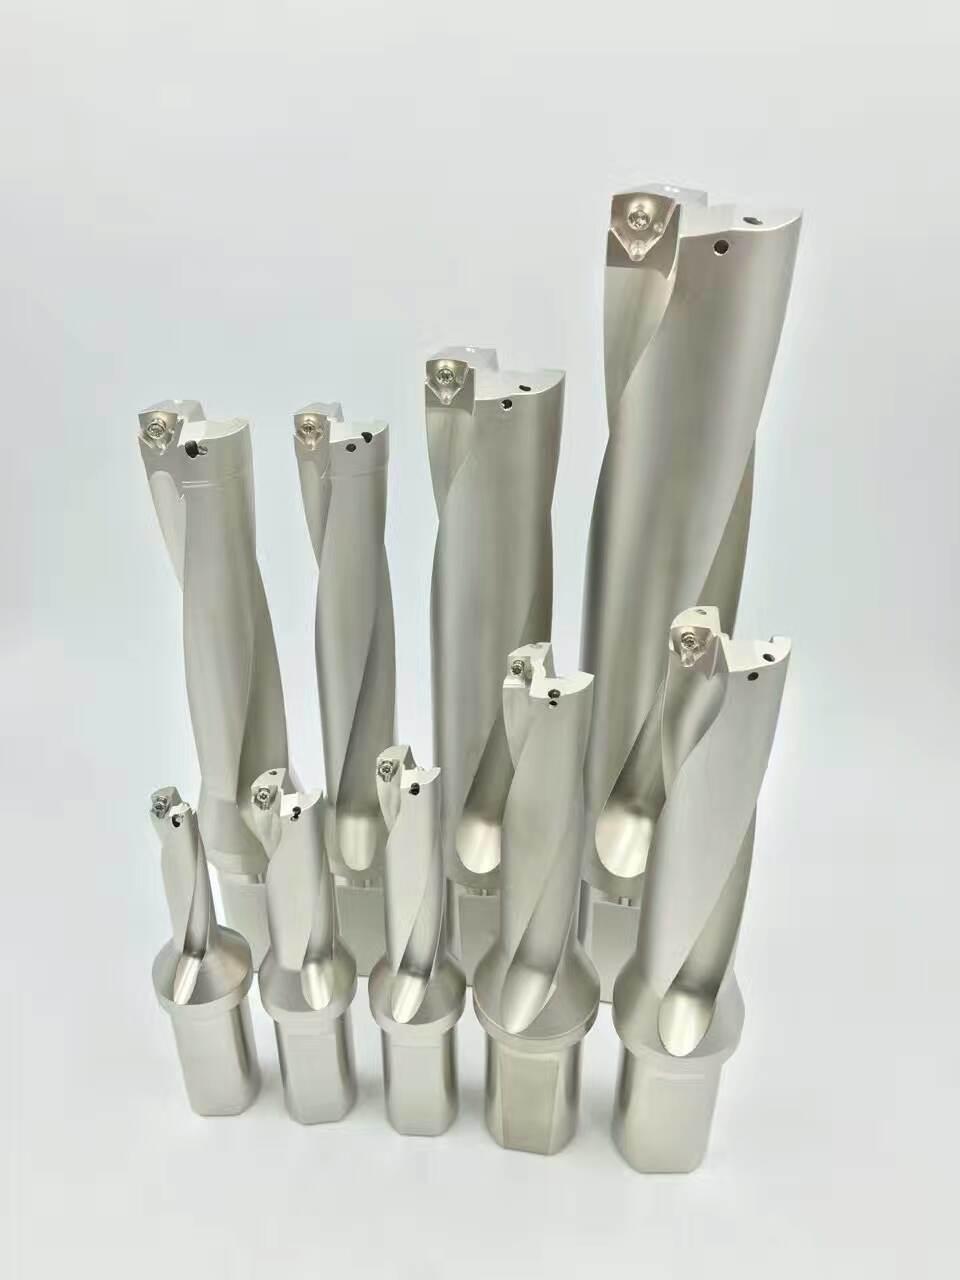 Drilling Tools for Wcmx Spgt Carbide Inserts 2xd U Drilling Tools